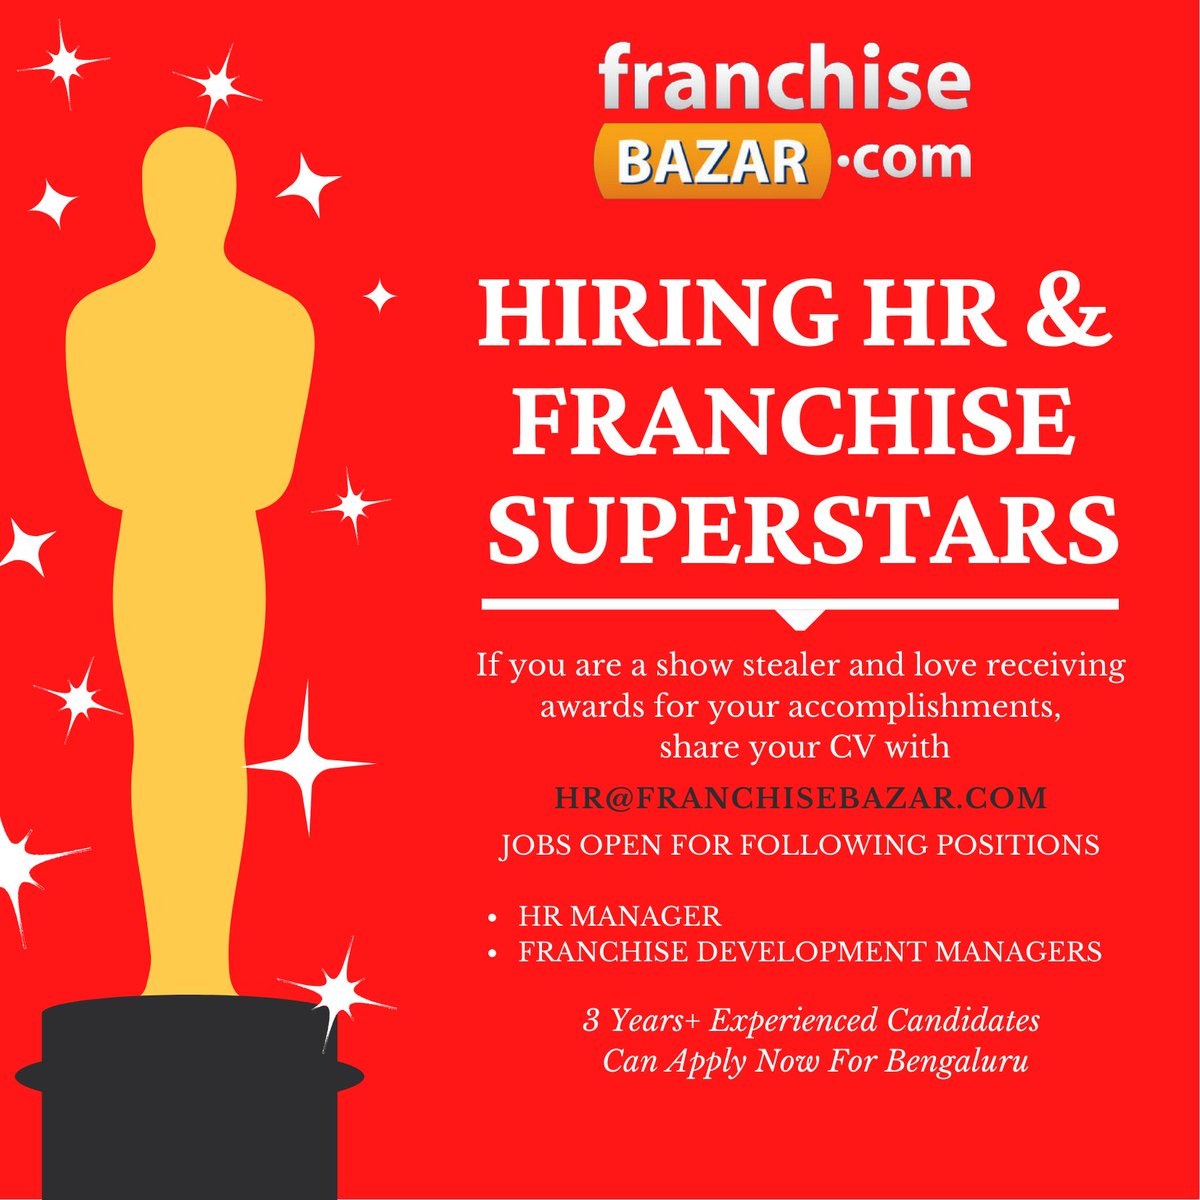 We are #Hiring #HumanResources & #FranchiseManager in #Bengaluru.

Minimum of 3 years of relevant experience and fluent in English & Hindi, You can  apply for these job openings now.

#jobopenings #hiringalert #applynow #hrmanager #hrmanagerjobs #franchisejobs #franchisemanagers